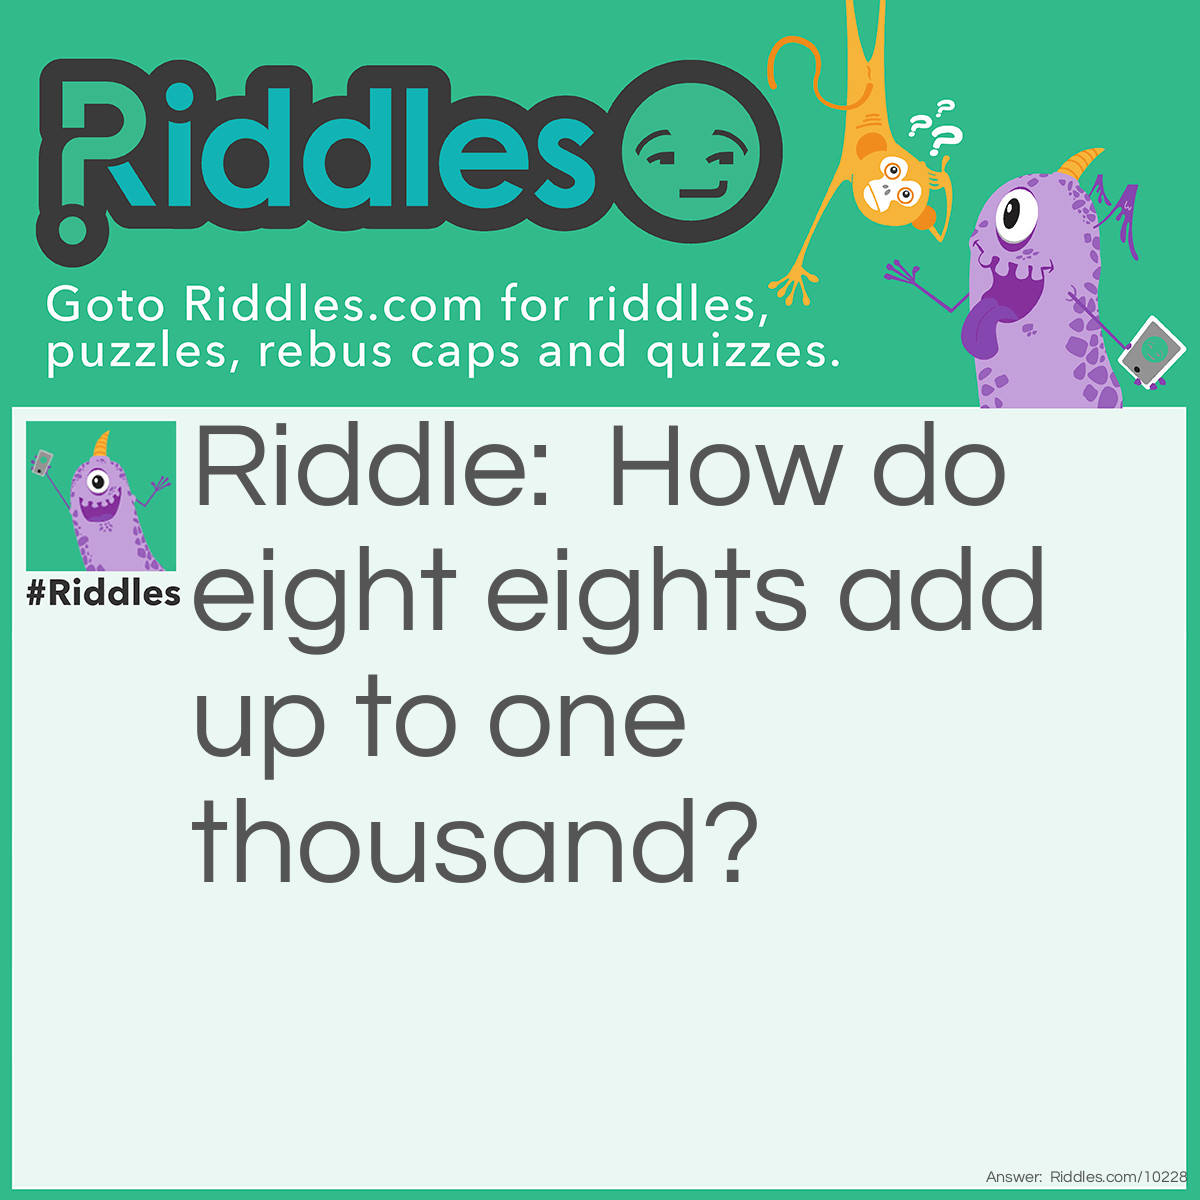 Riddle: How do eight eights add up to one thousand? Answer: 888+88+8+8+8=1,000